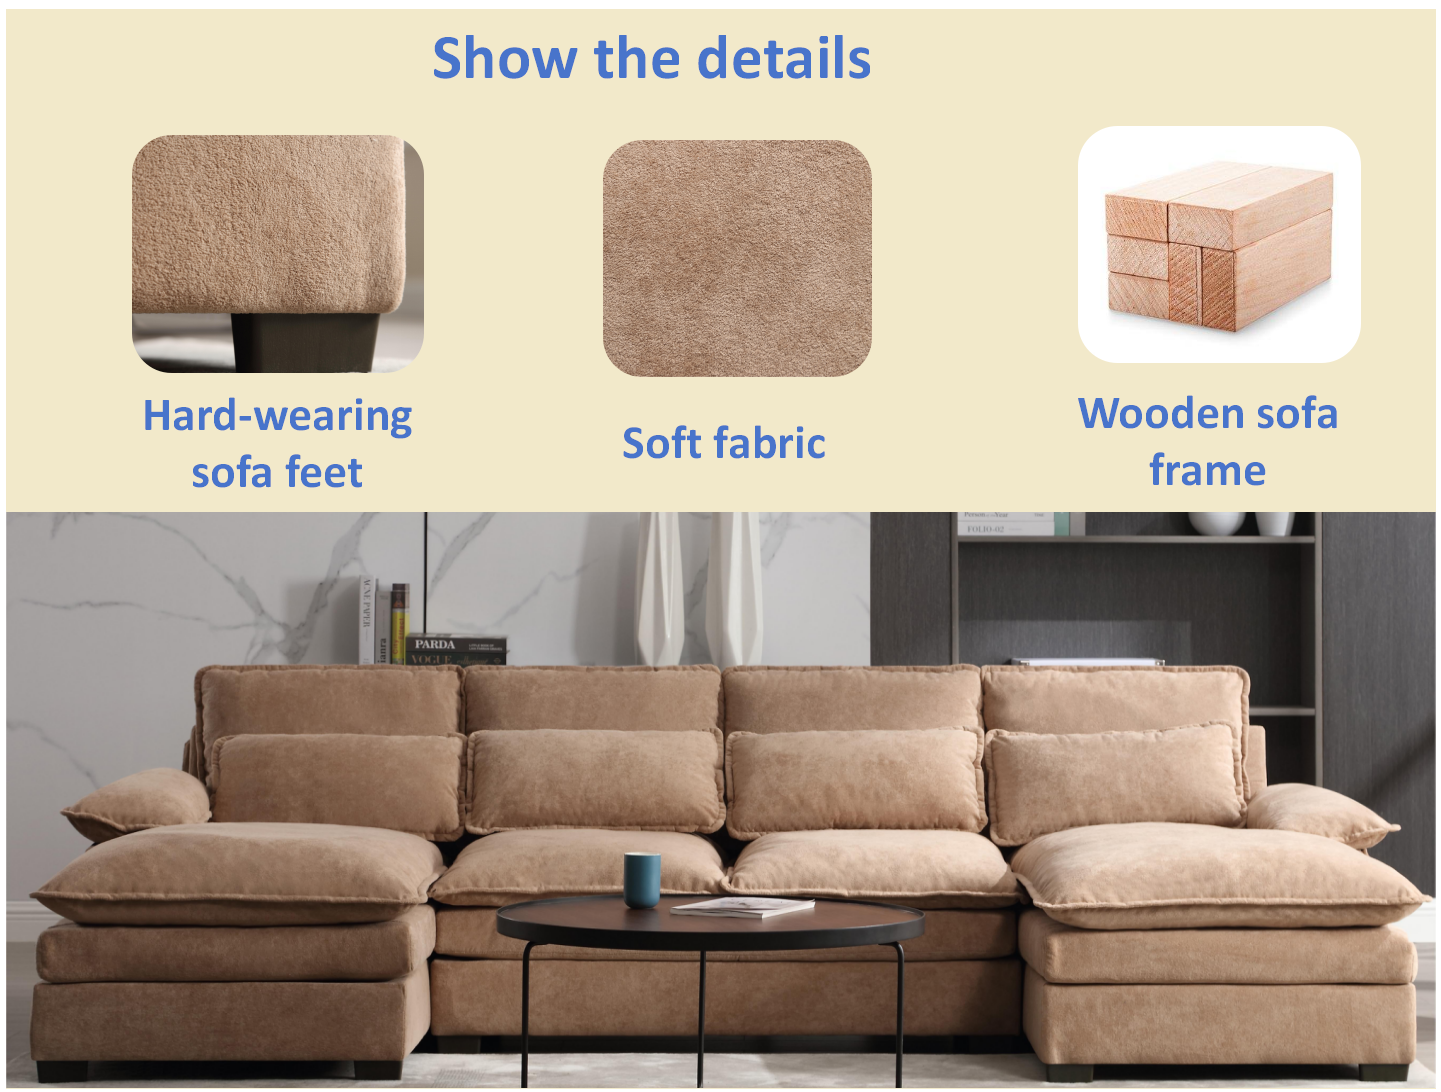 U Shaped Modular Sectional Sofa Couch, 6 Deap Seats brown-light brown-polyester-wood-primary living